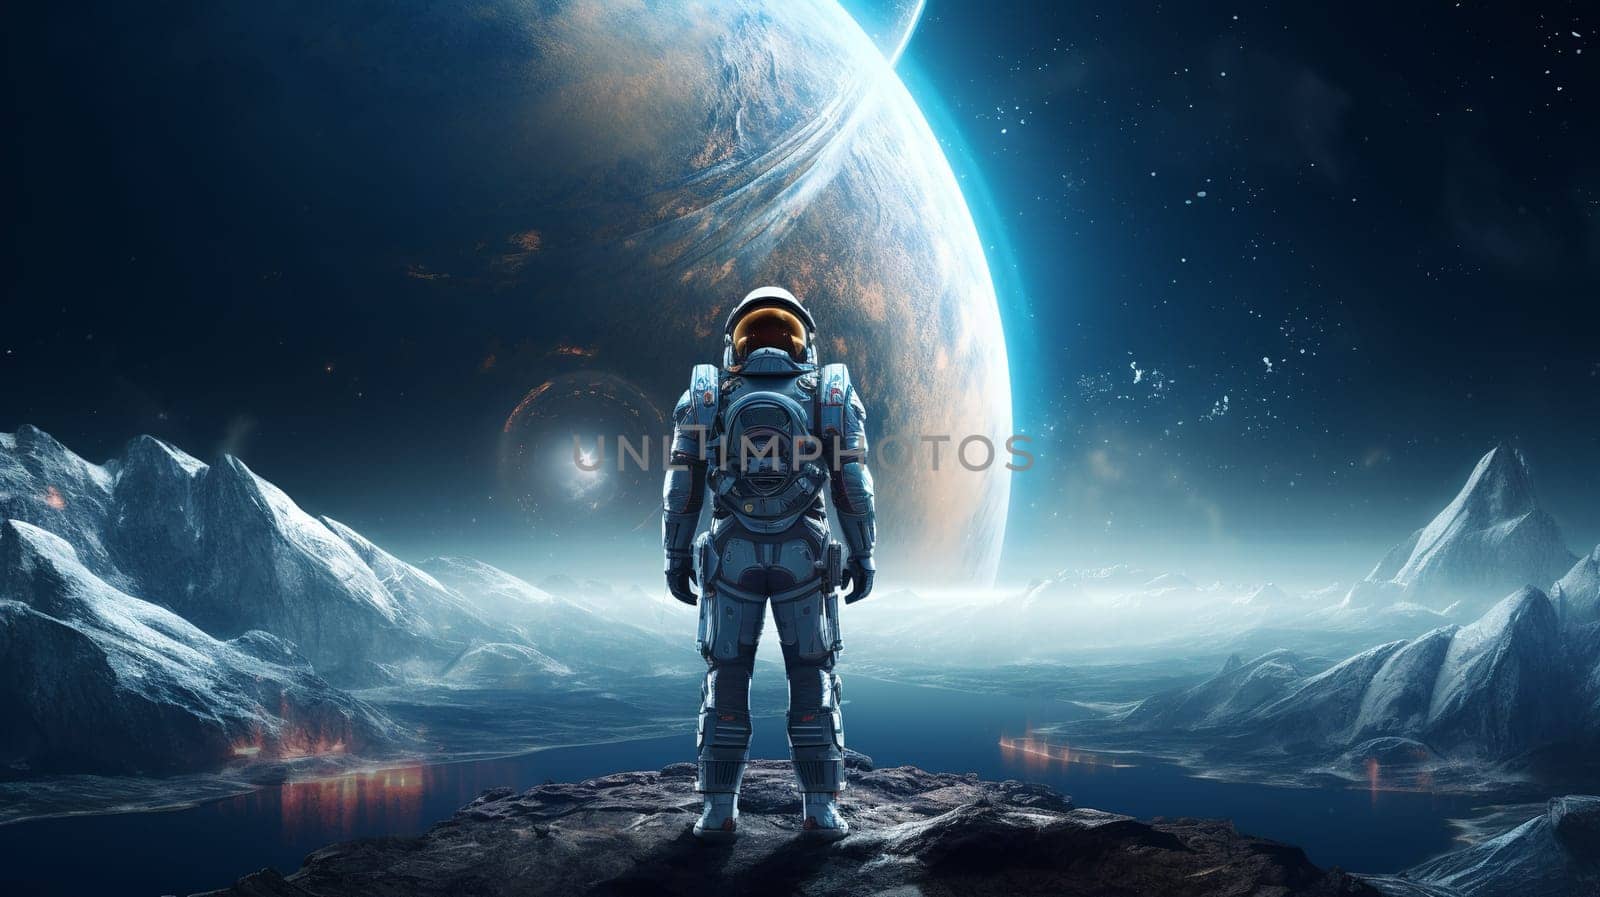  Astronaut Stands on Spaceship, Gazing Toward Distant Earth Wallpaper Generate AI by Mrsongrphc